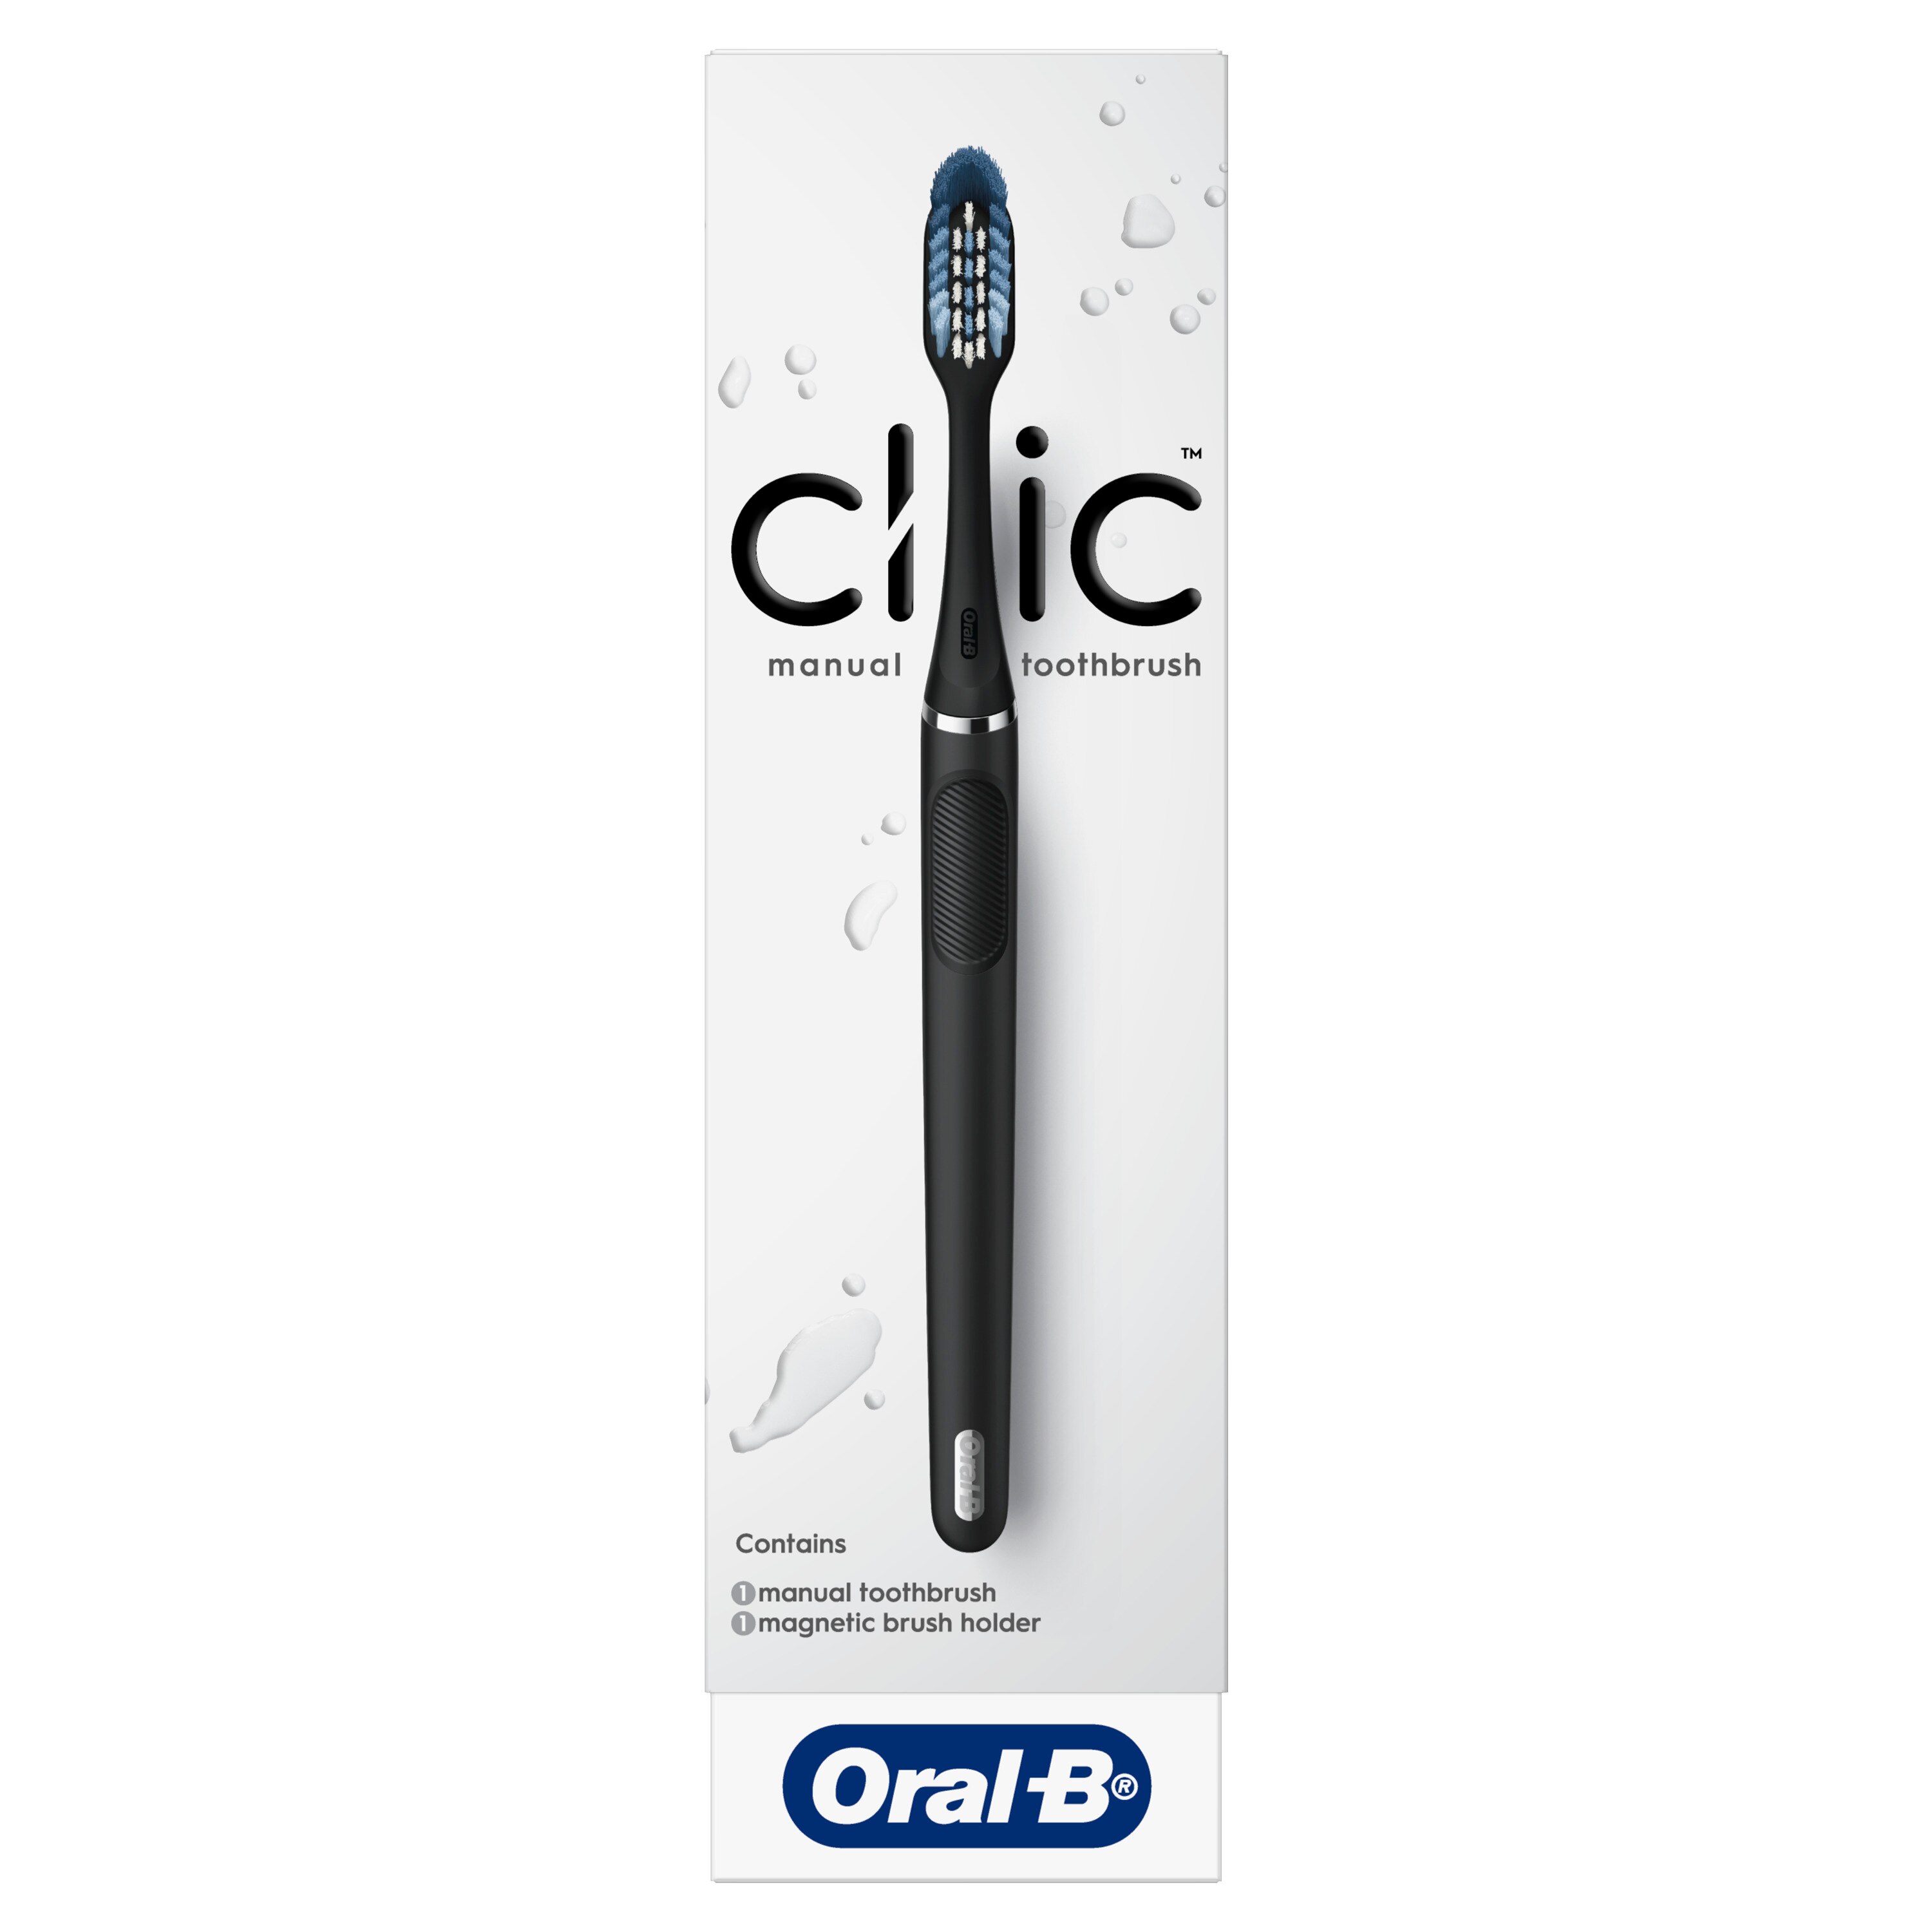 Oral-B Clic Manual Toothbrush, Matte Black, With 1 Replaceable Brush Head And Magnetic Holder , CVS